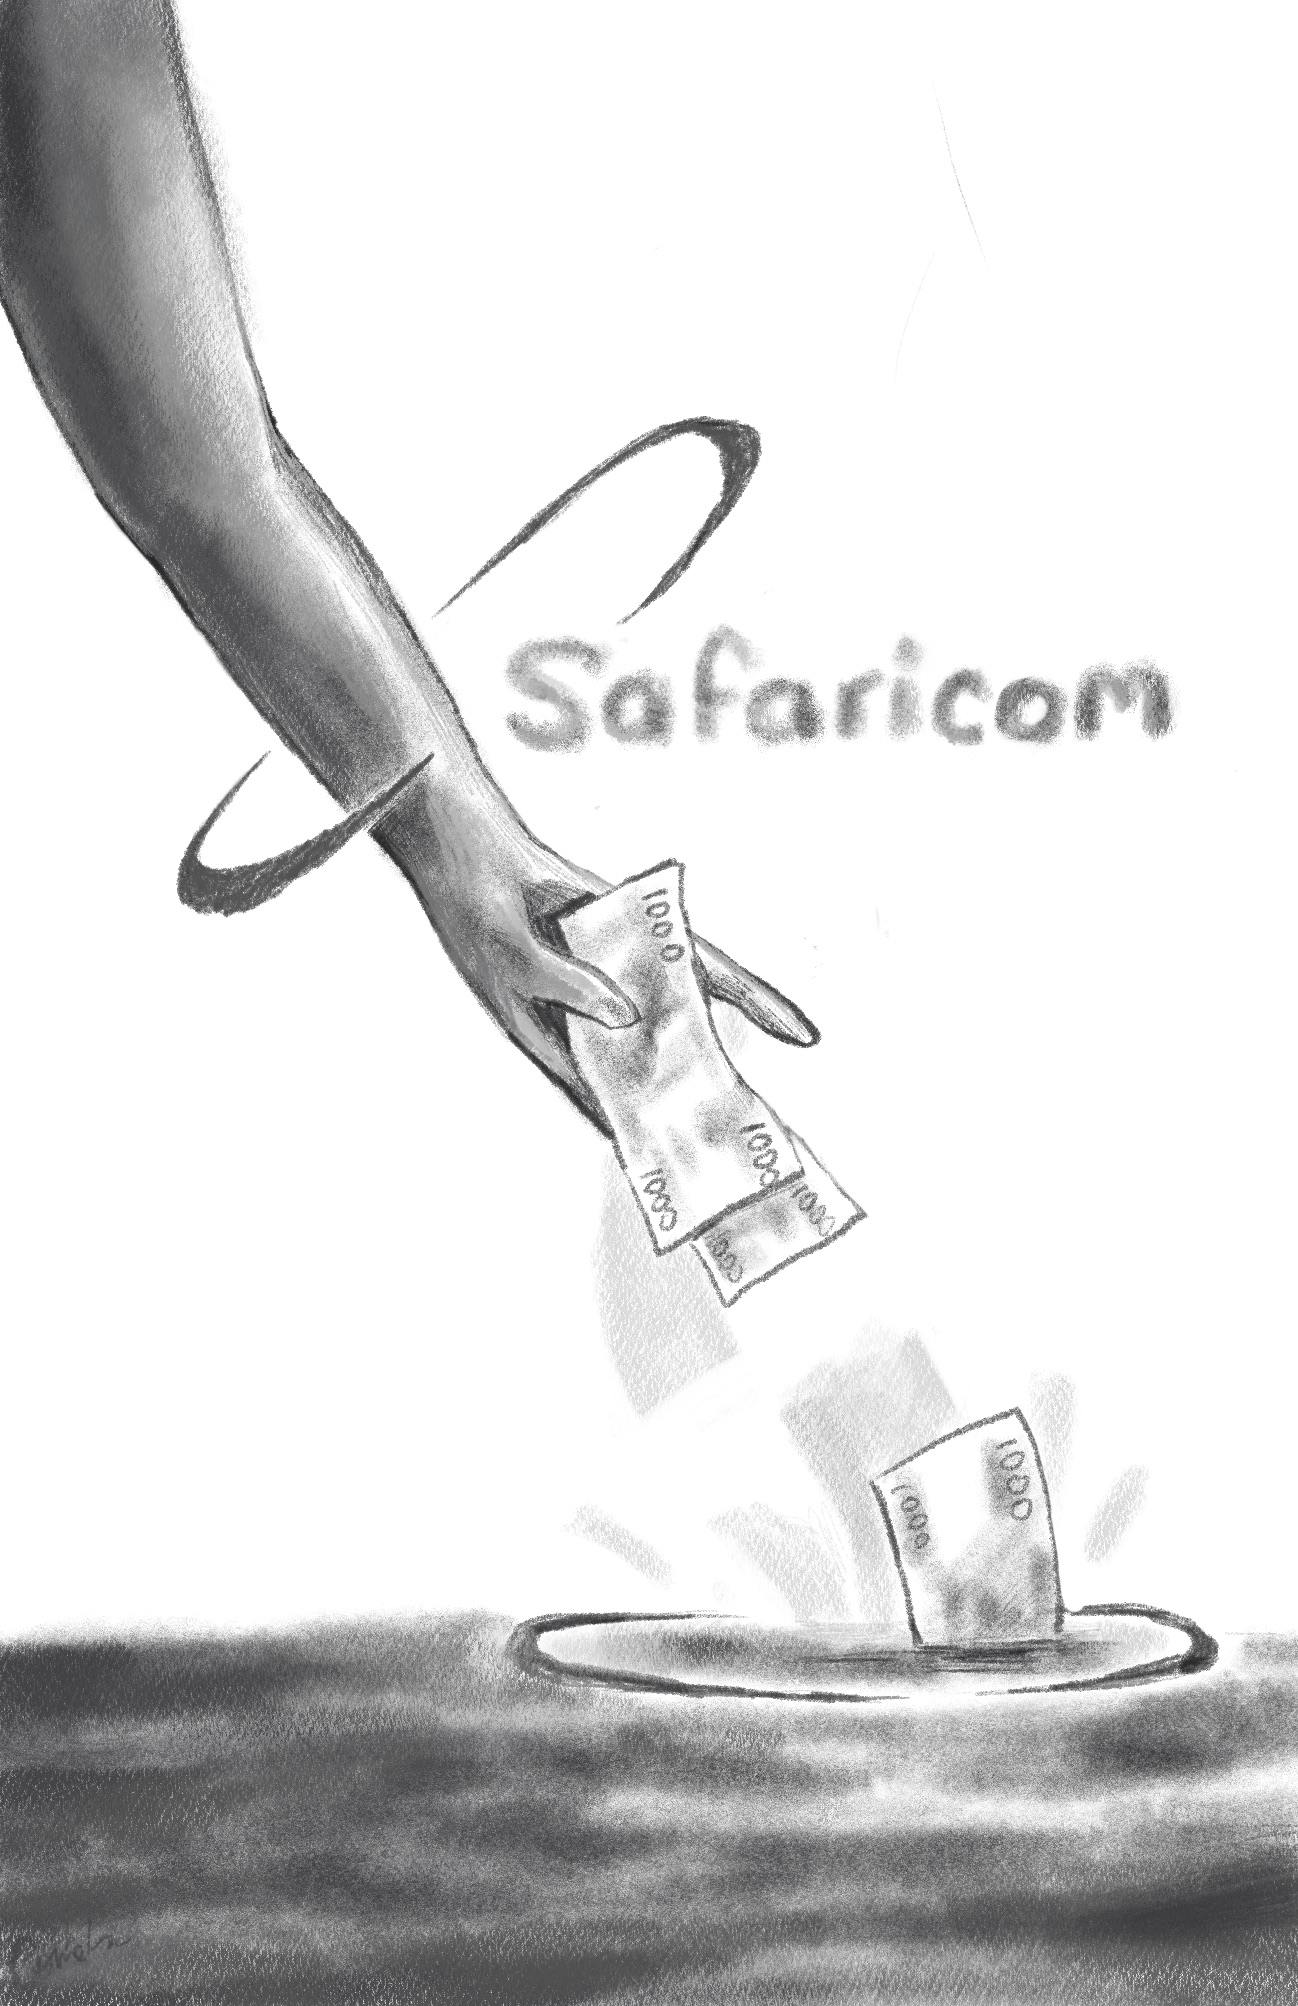 Hands transferring cash, with the text Safaricom in an airbrush style.